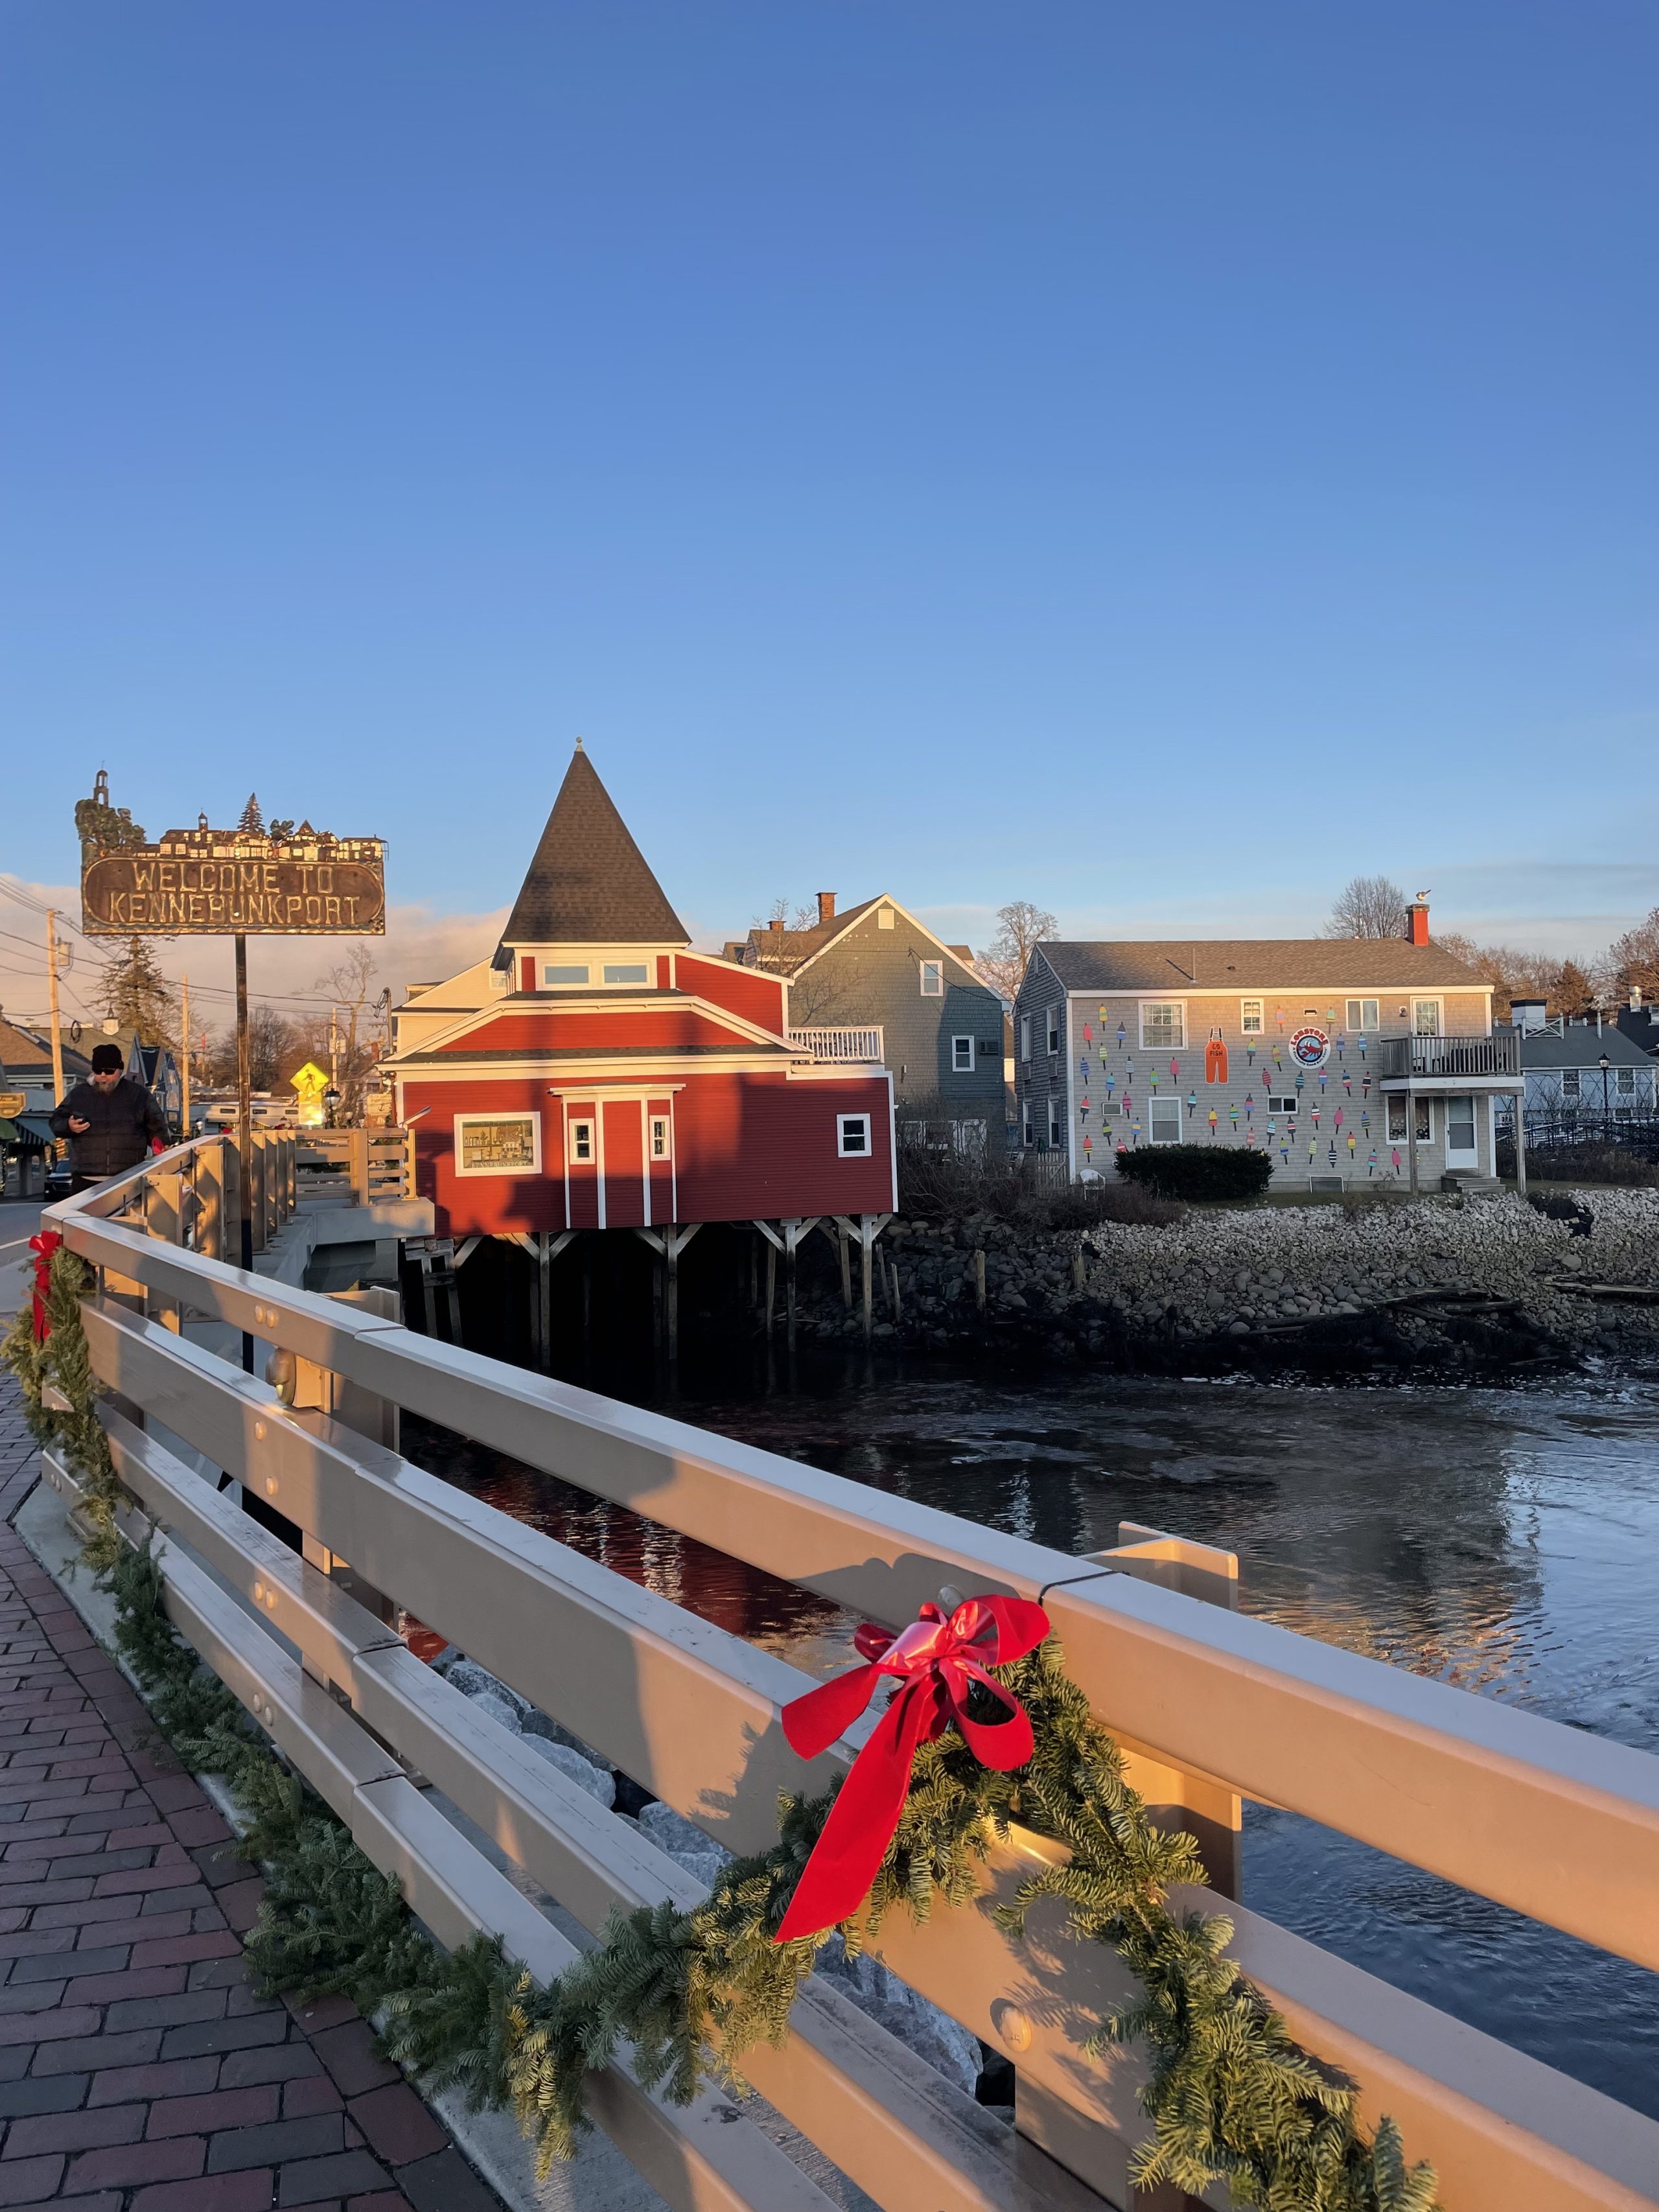 A building with a red bow located on a bridge over water in Kennebunkport. The surroundings include outdoor landscape with a lake and a city in the background.